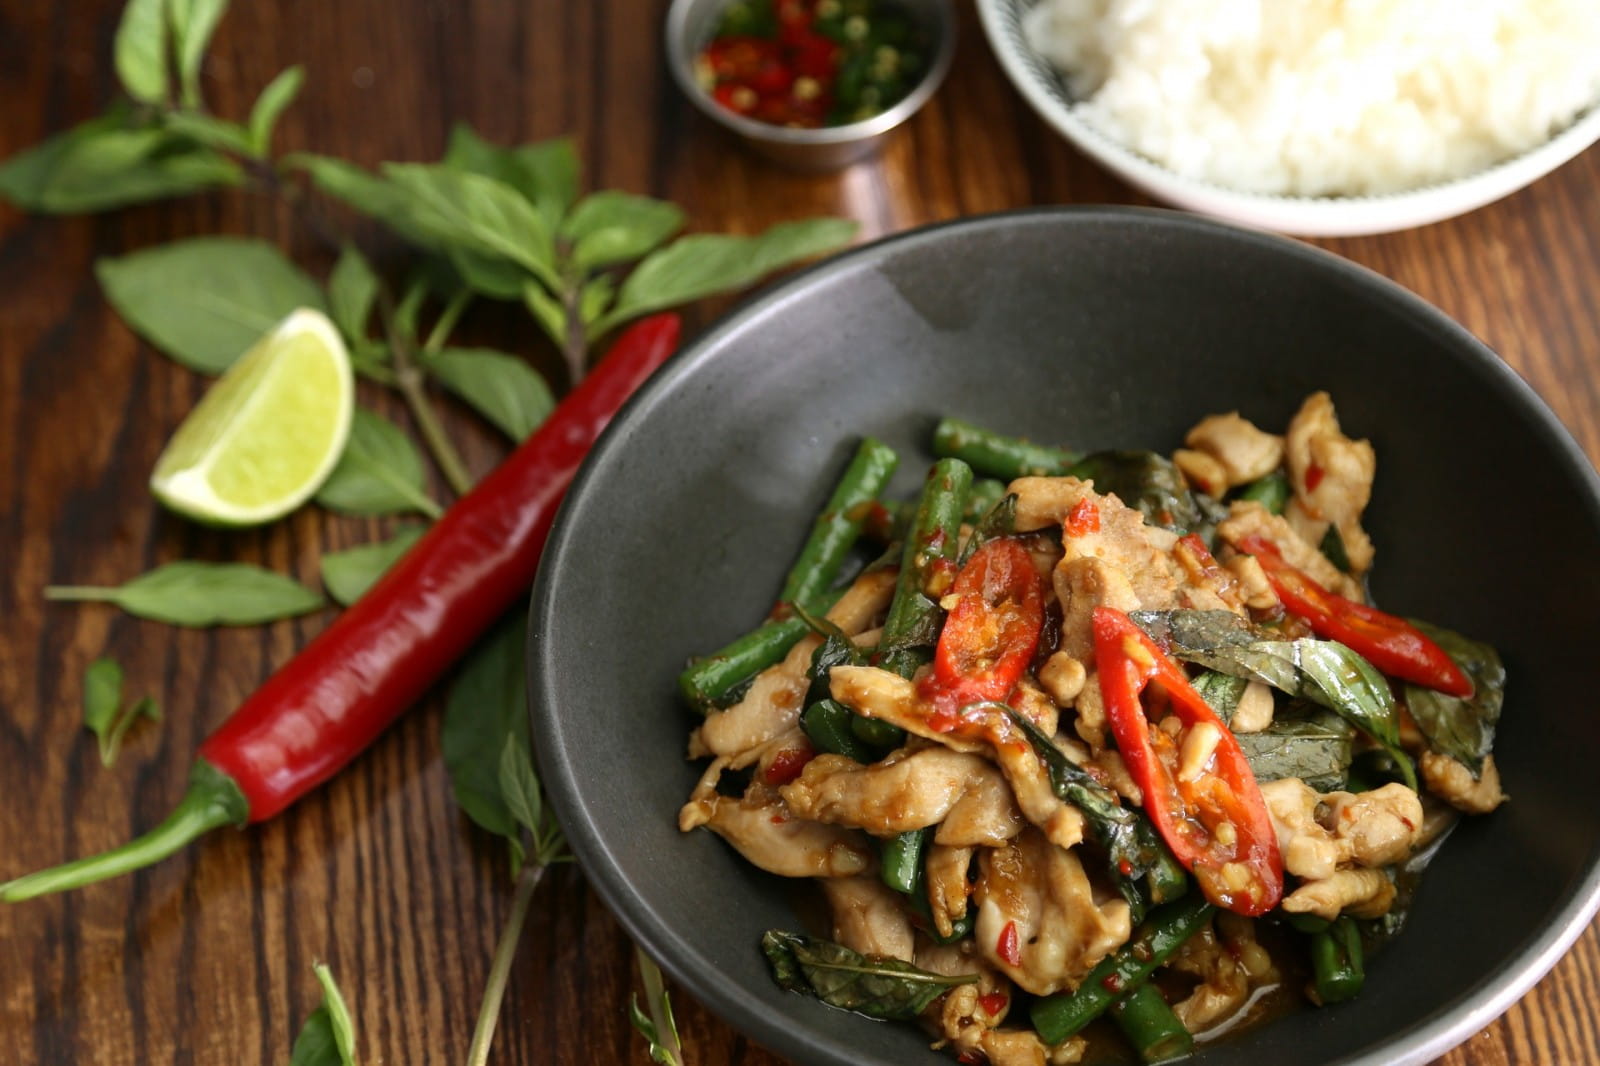 Which drinks pair best with Thai food?